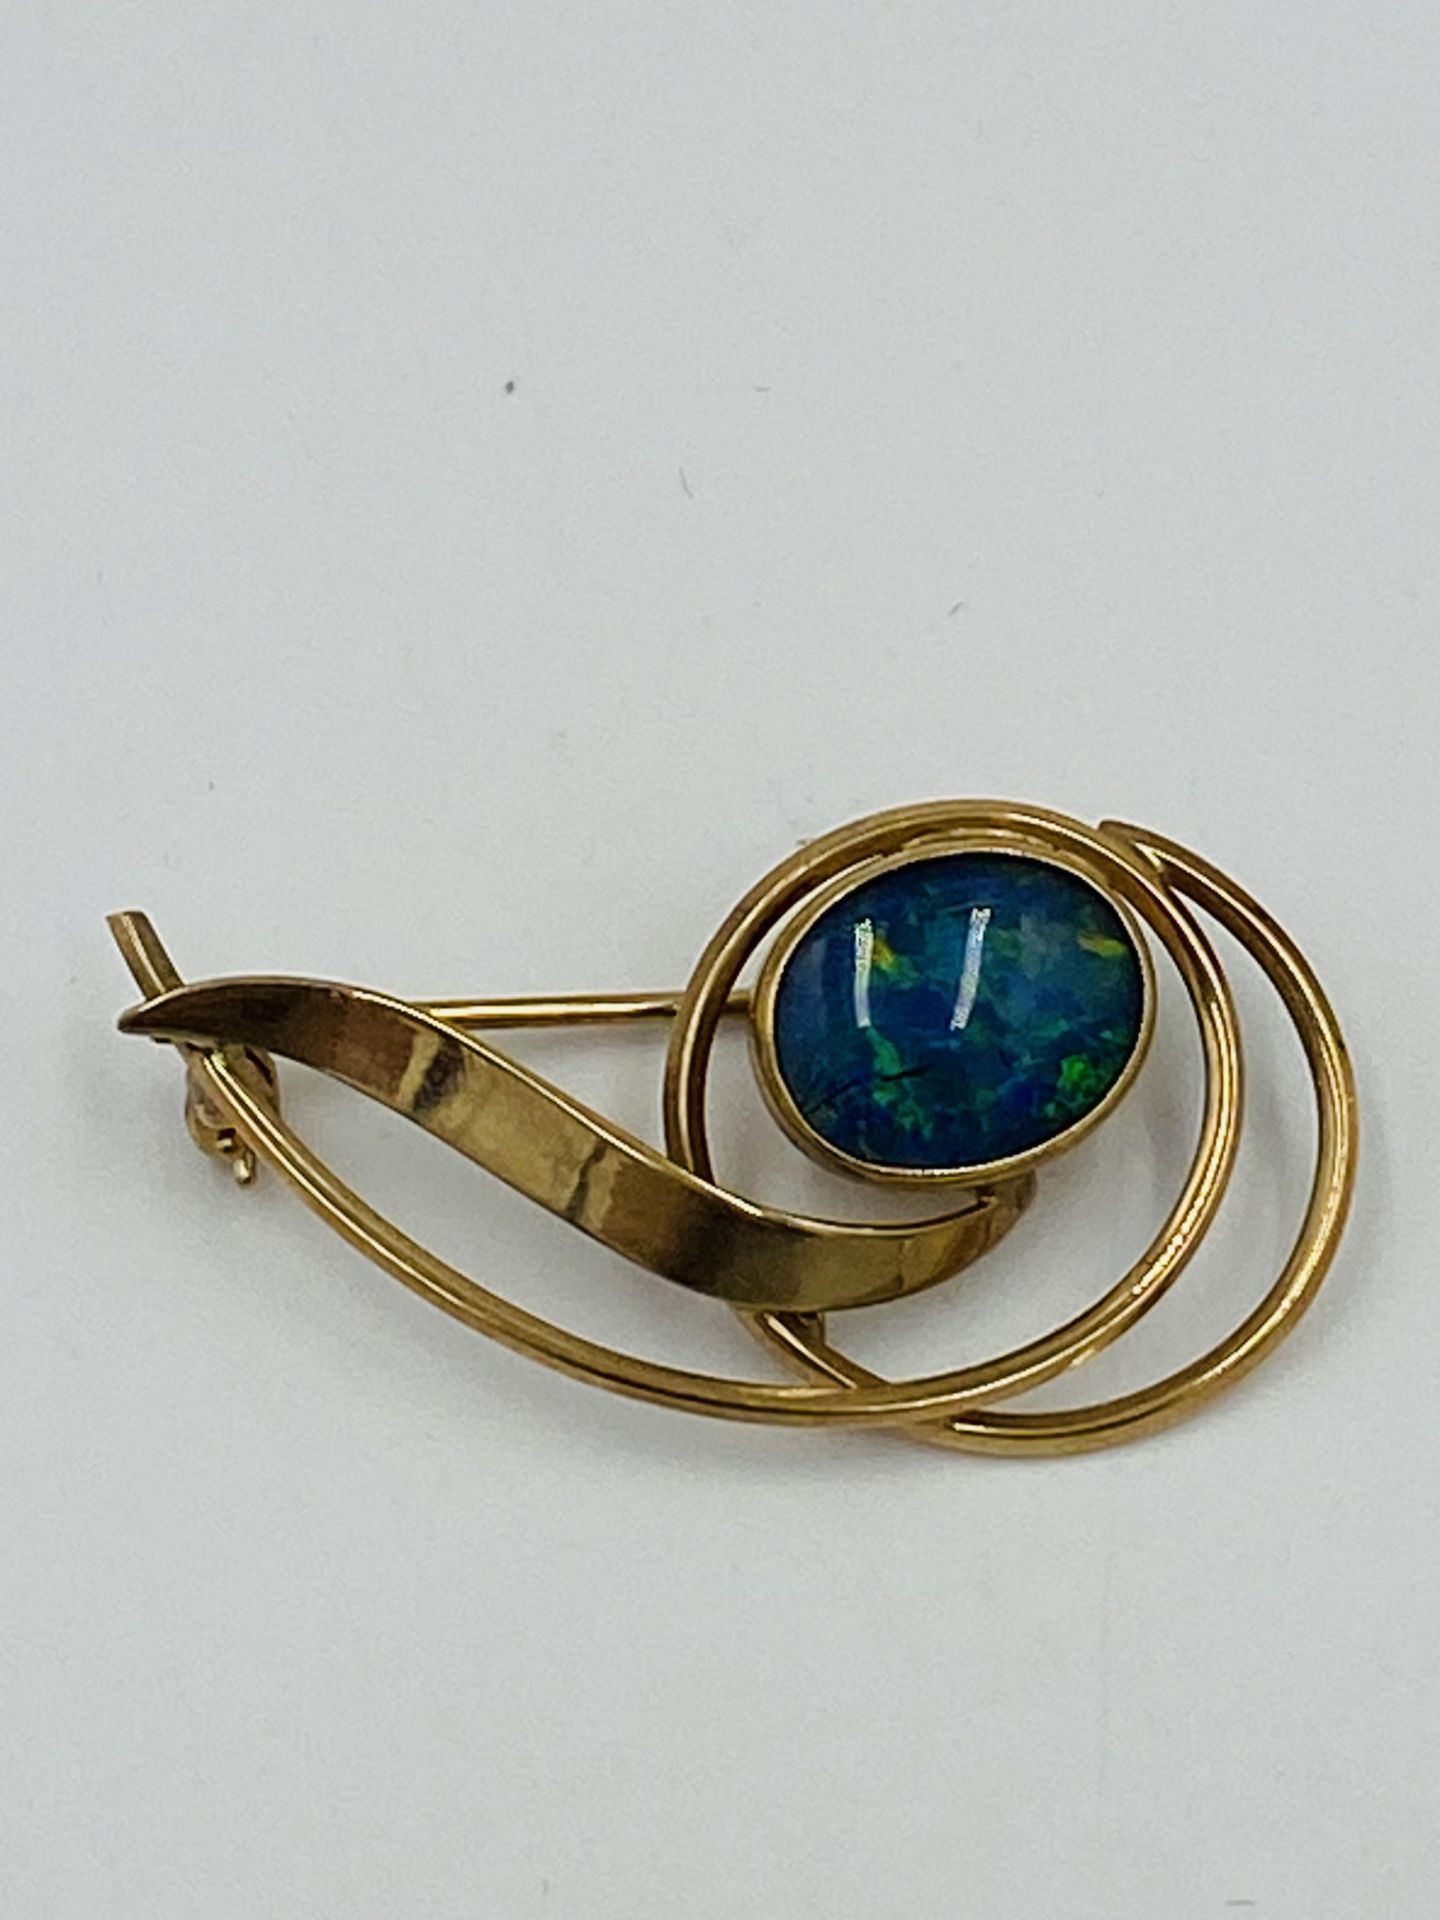 9ct gold brooch set with an opal - Image 3 of 5